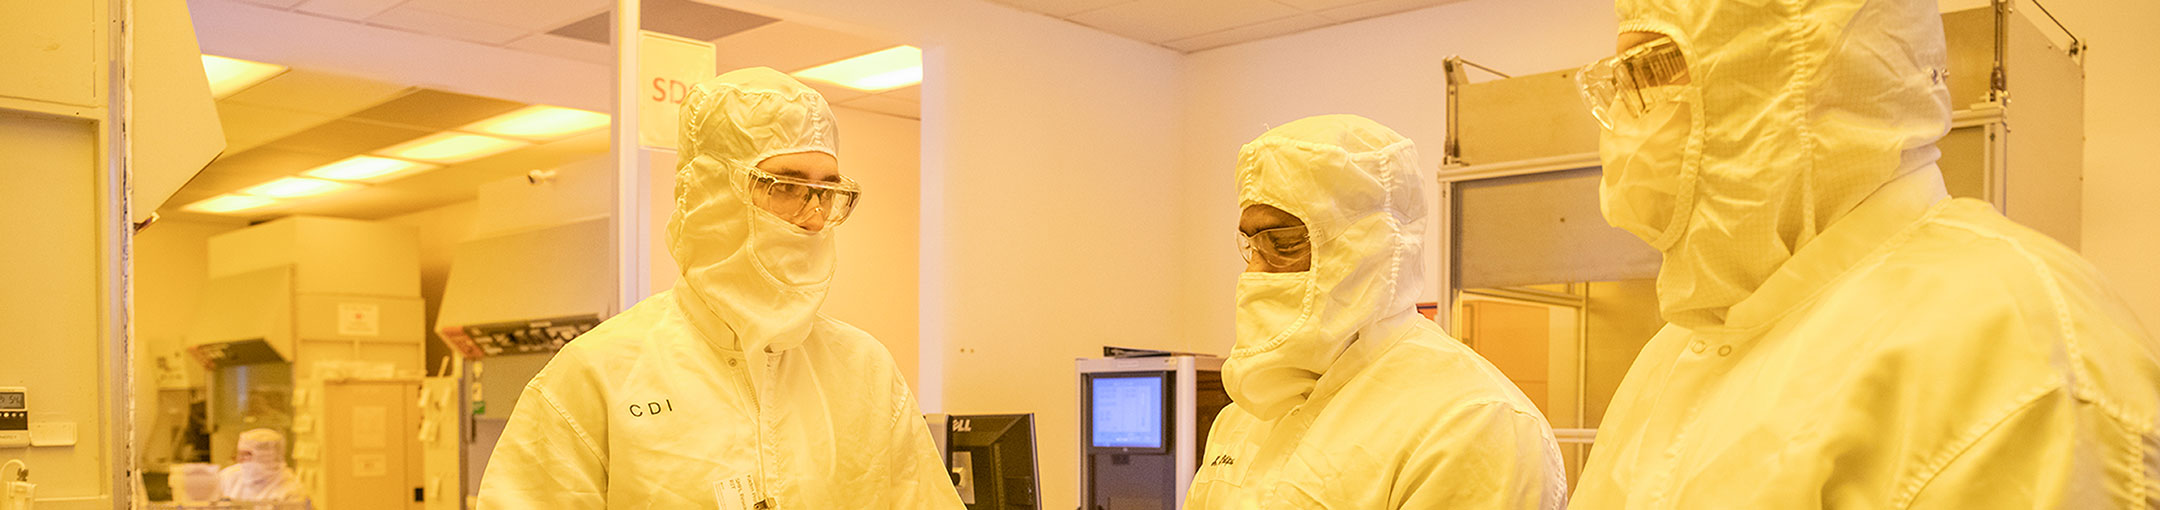 3 people in a clean room wearing lab suits